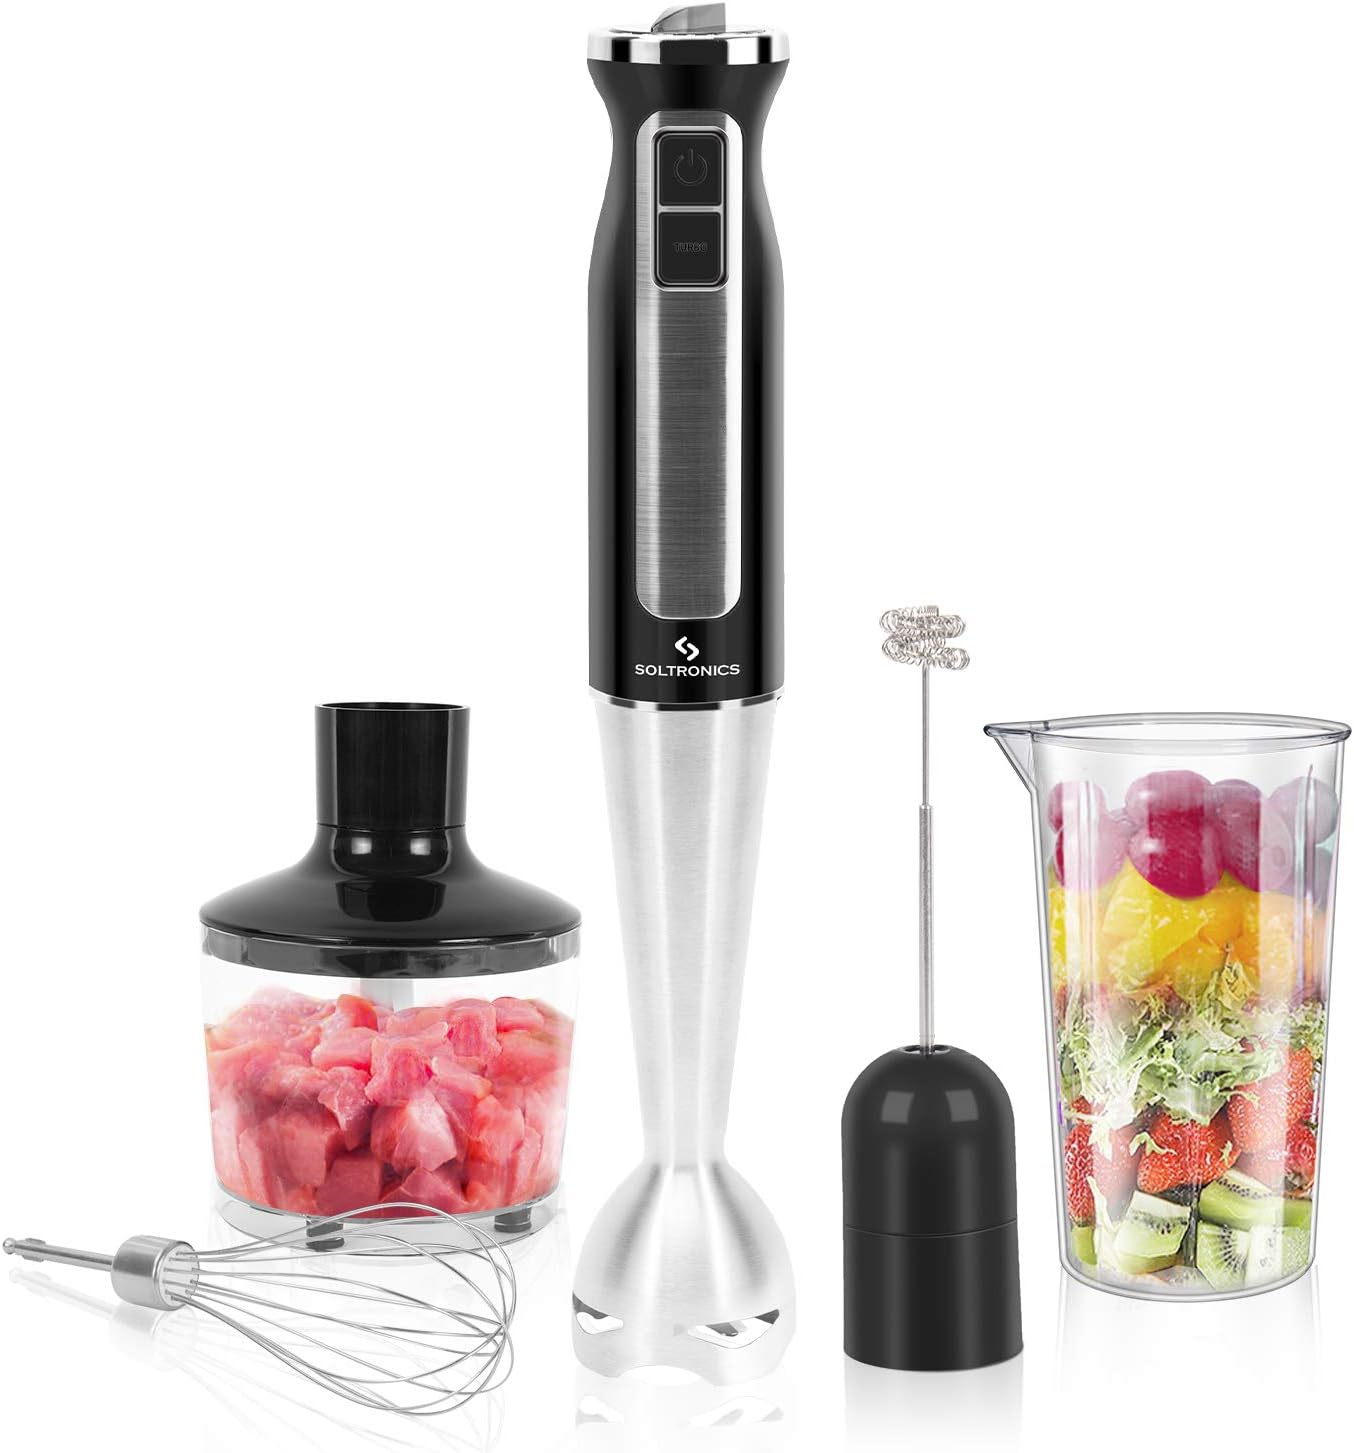 SOLTRONICS 5-in-1 Hand Blender, 5-in-1, 8-Speed 500 Watts Stick Blender with 860ml Food Grinder, 600ml Container, Milk Frother, Egg Whisk for Puree Infant Food, Smoothies, Sauces and Soups, Black